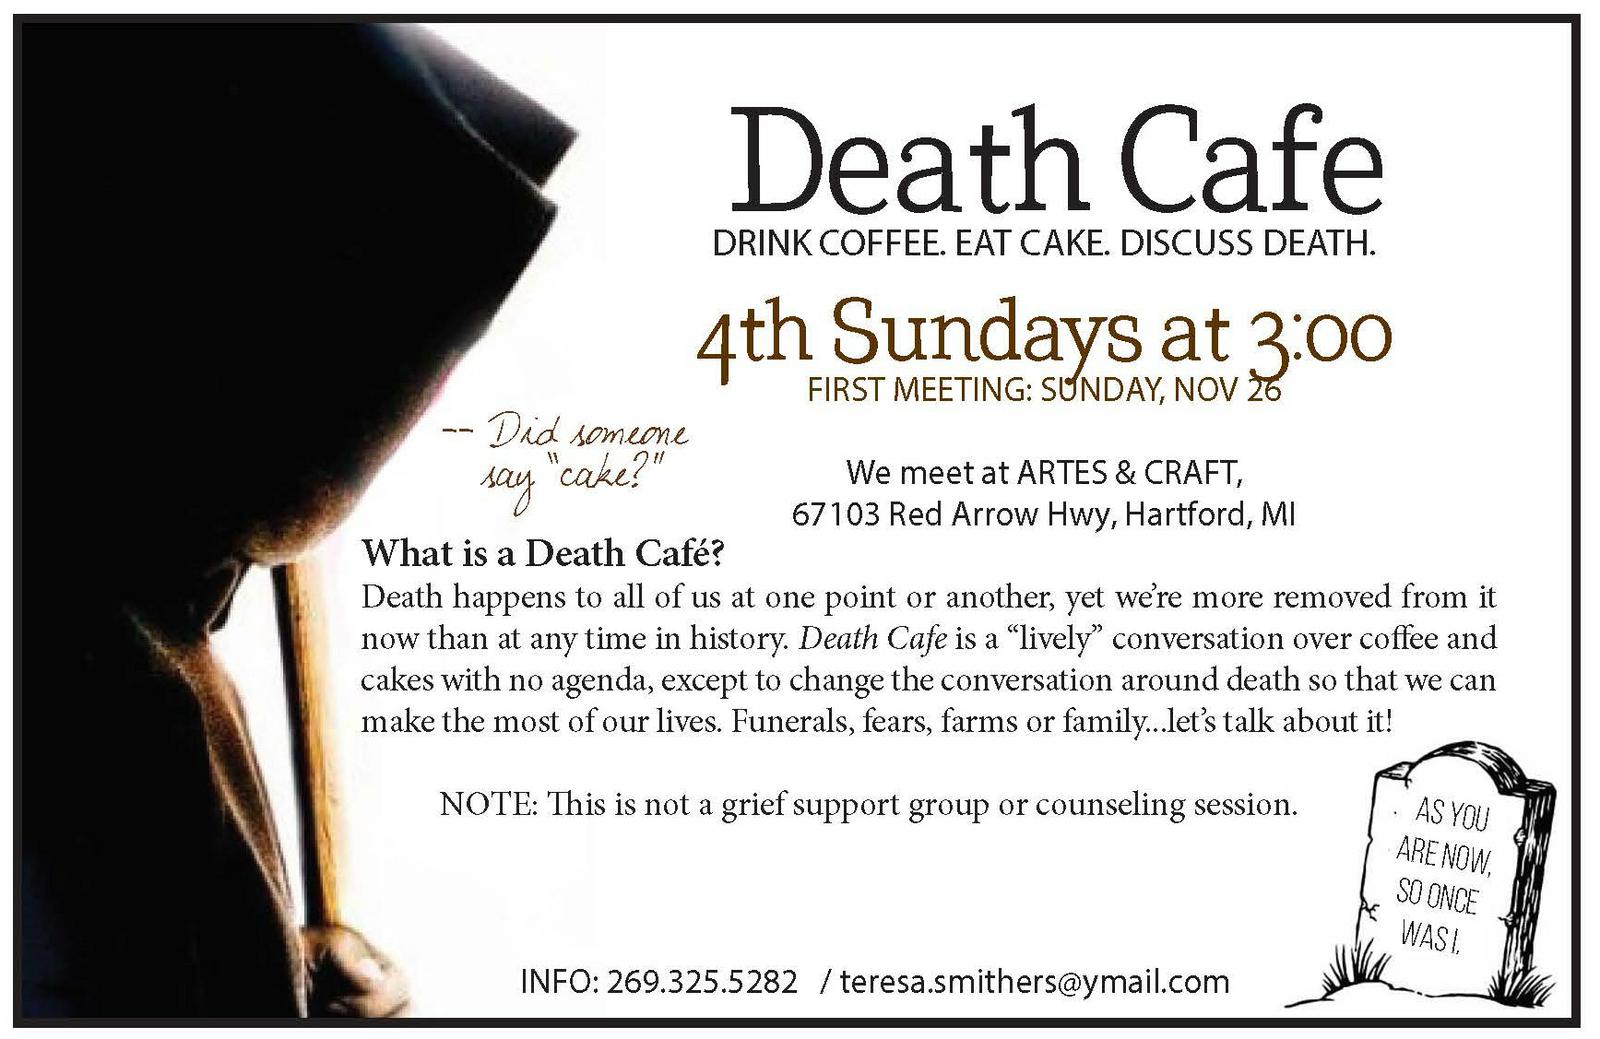 Death Cafe of North Berrien